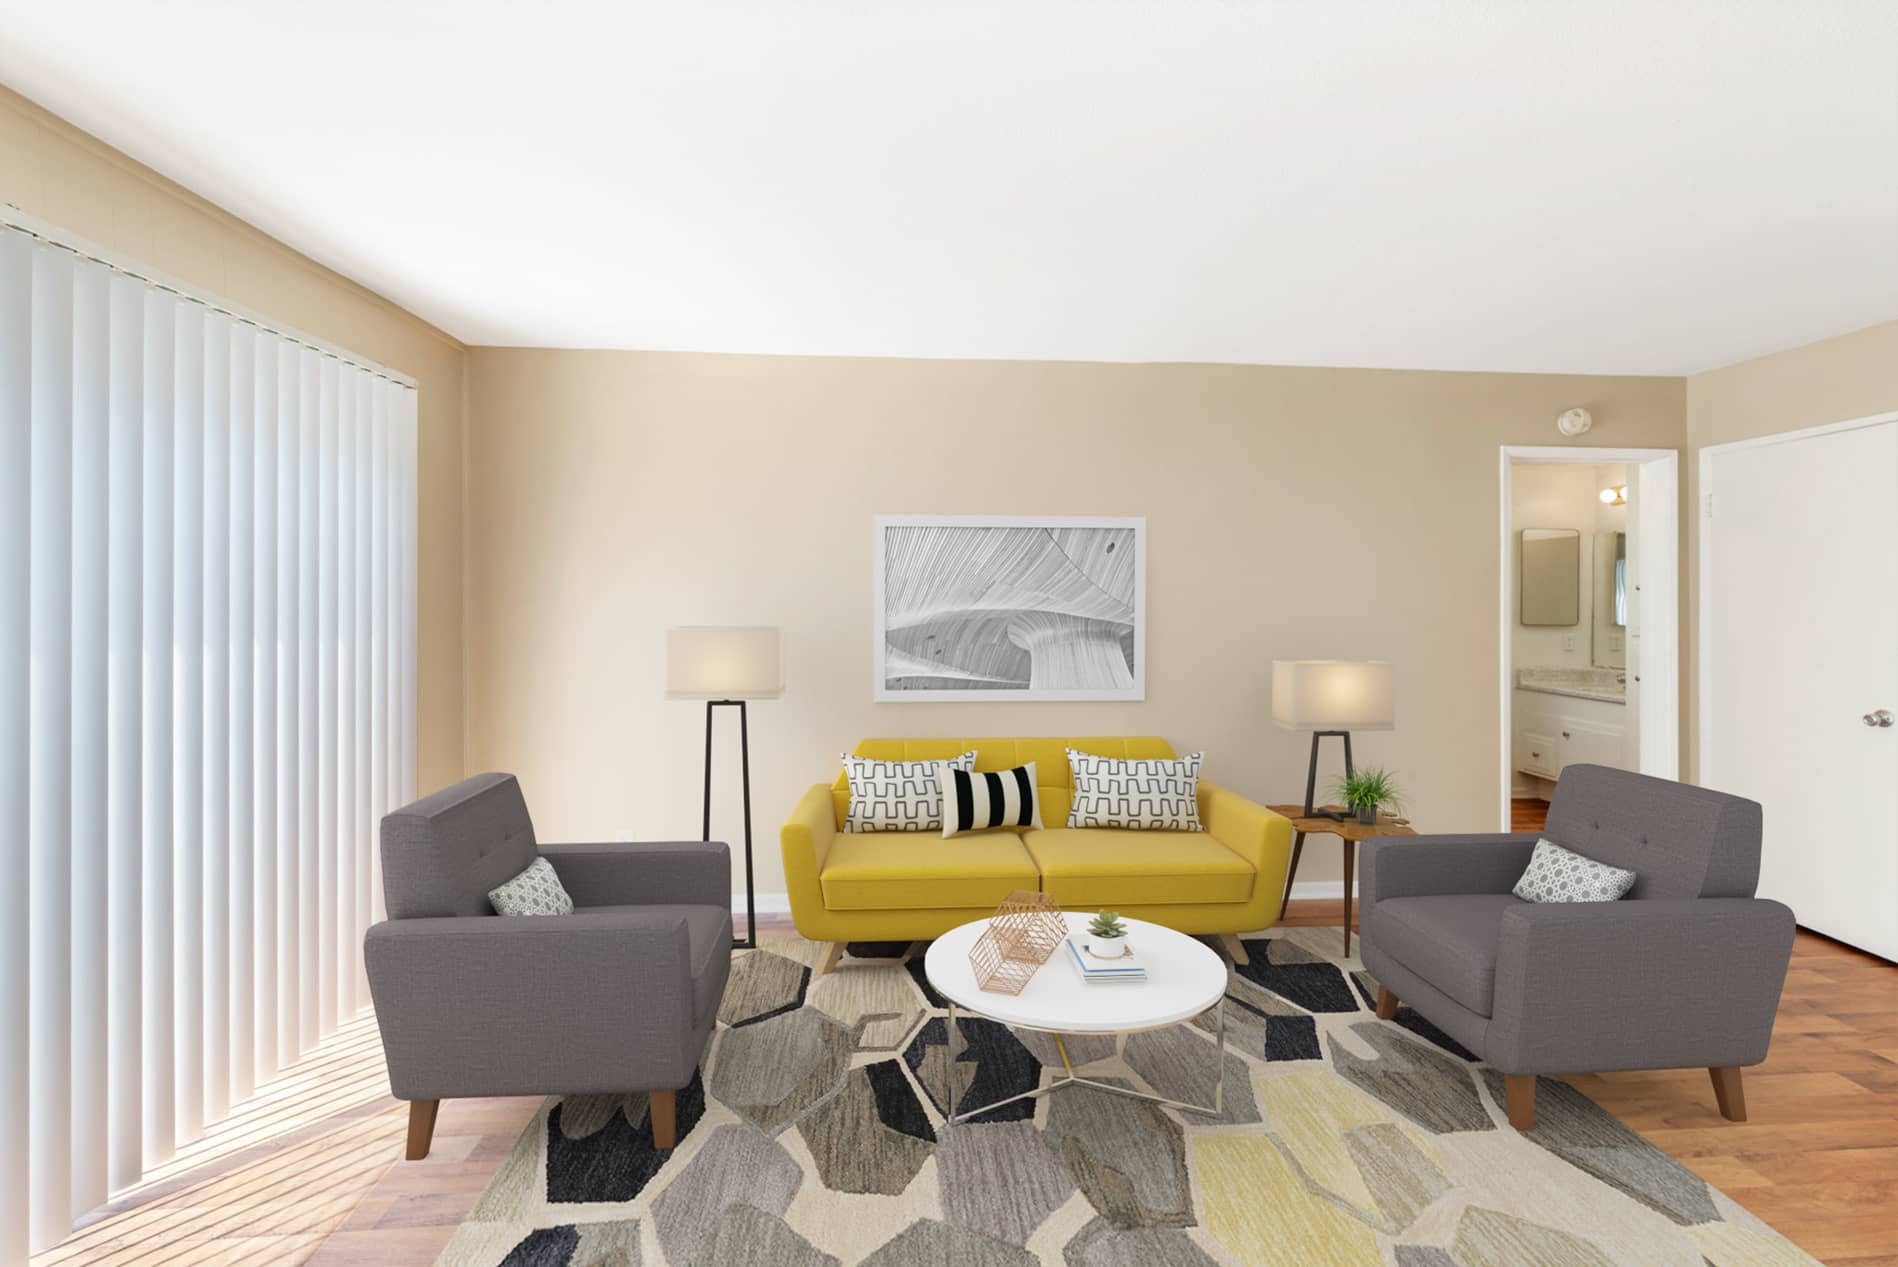 Rosebeach apartment virtually staged by Rooomy